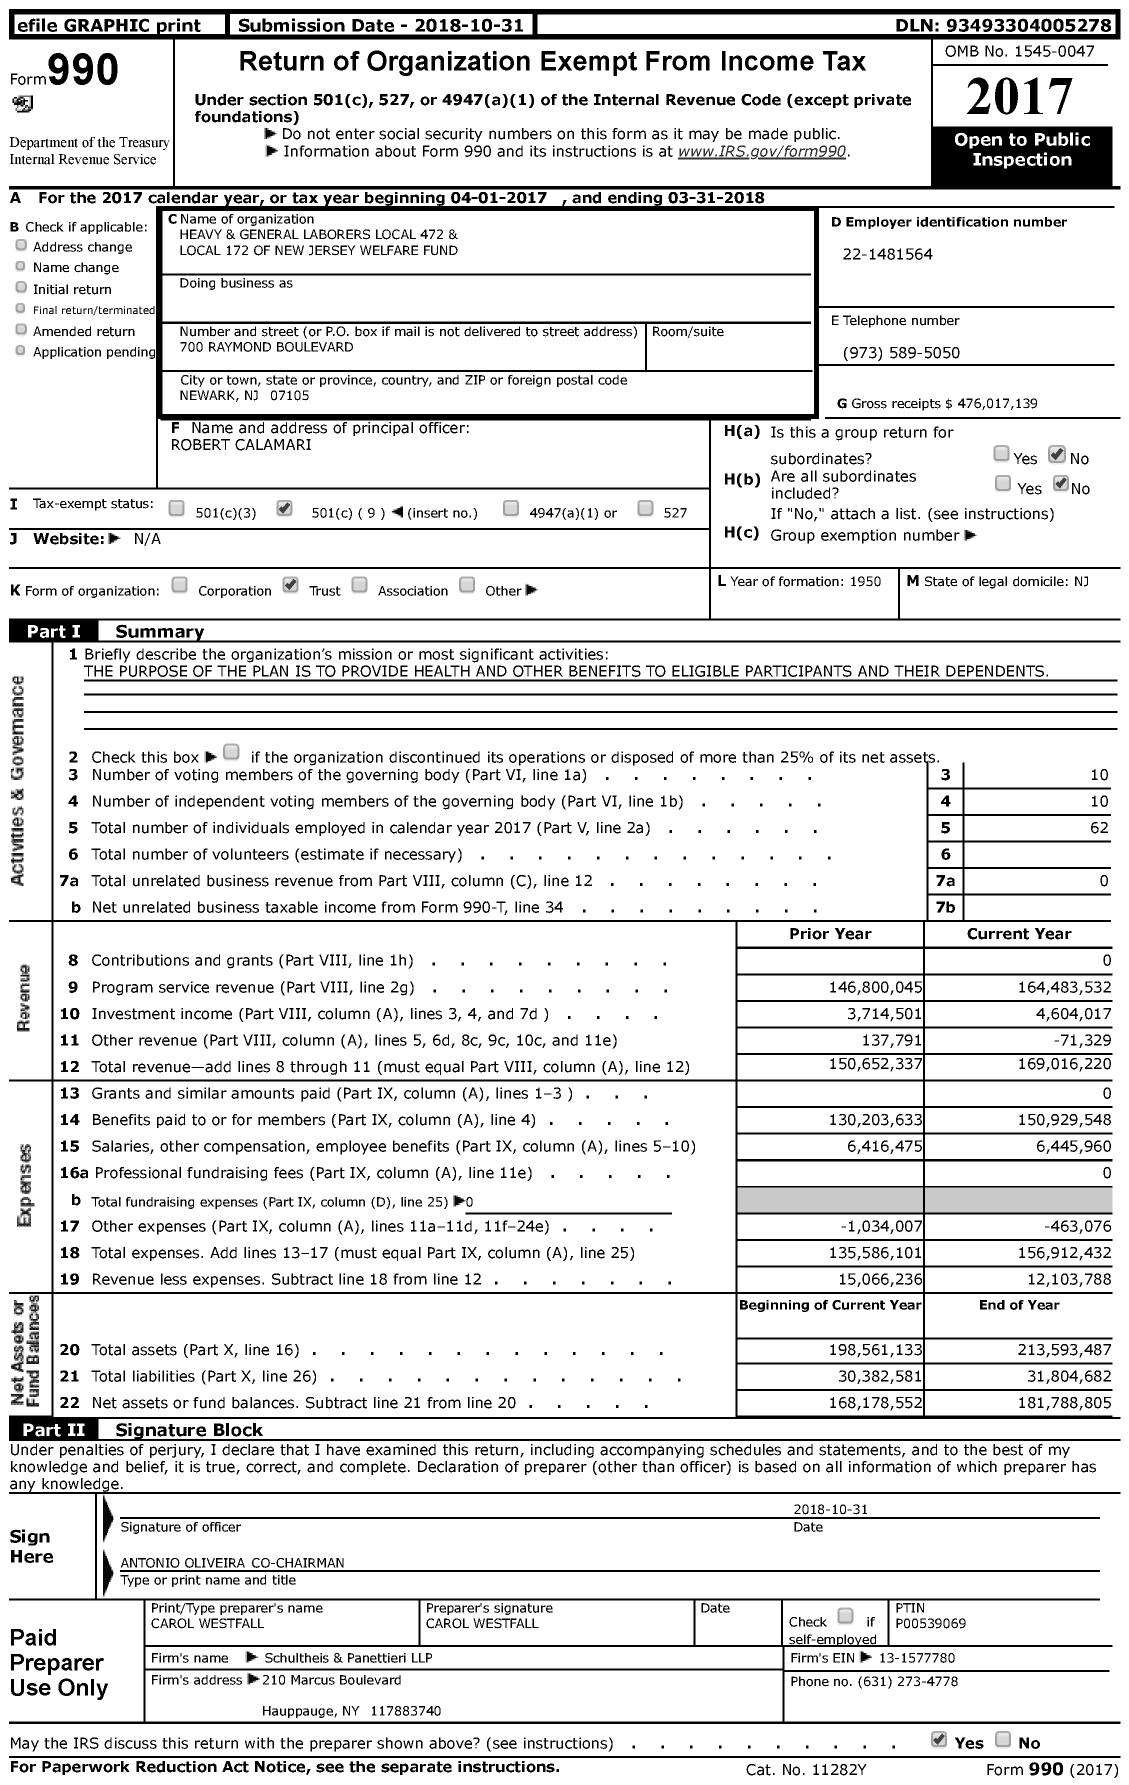 Image of first page of 2017 Form 990 for Heavy and General Laborers Local 472 and Local 172 of New Jersey Welfare Fund